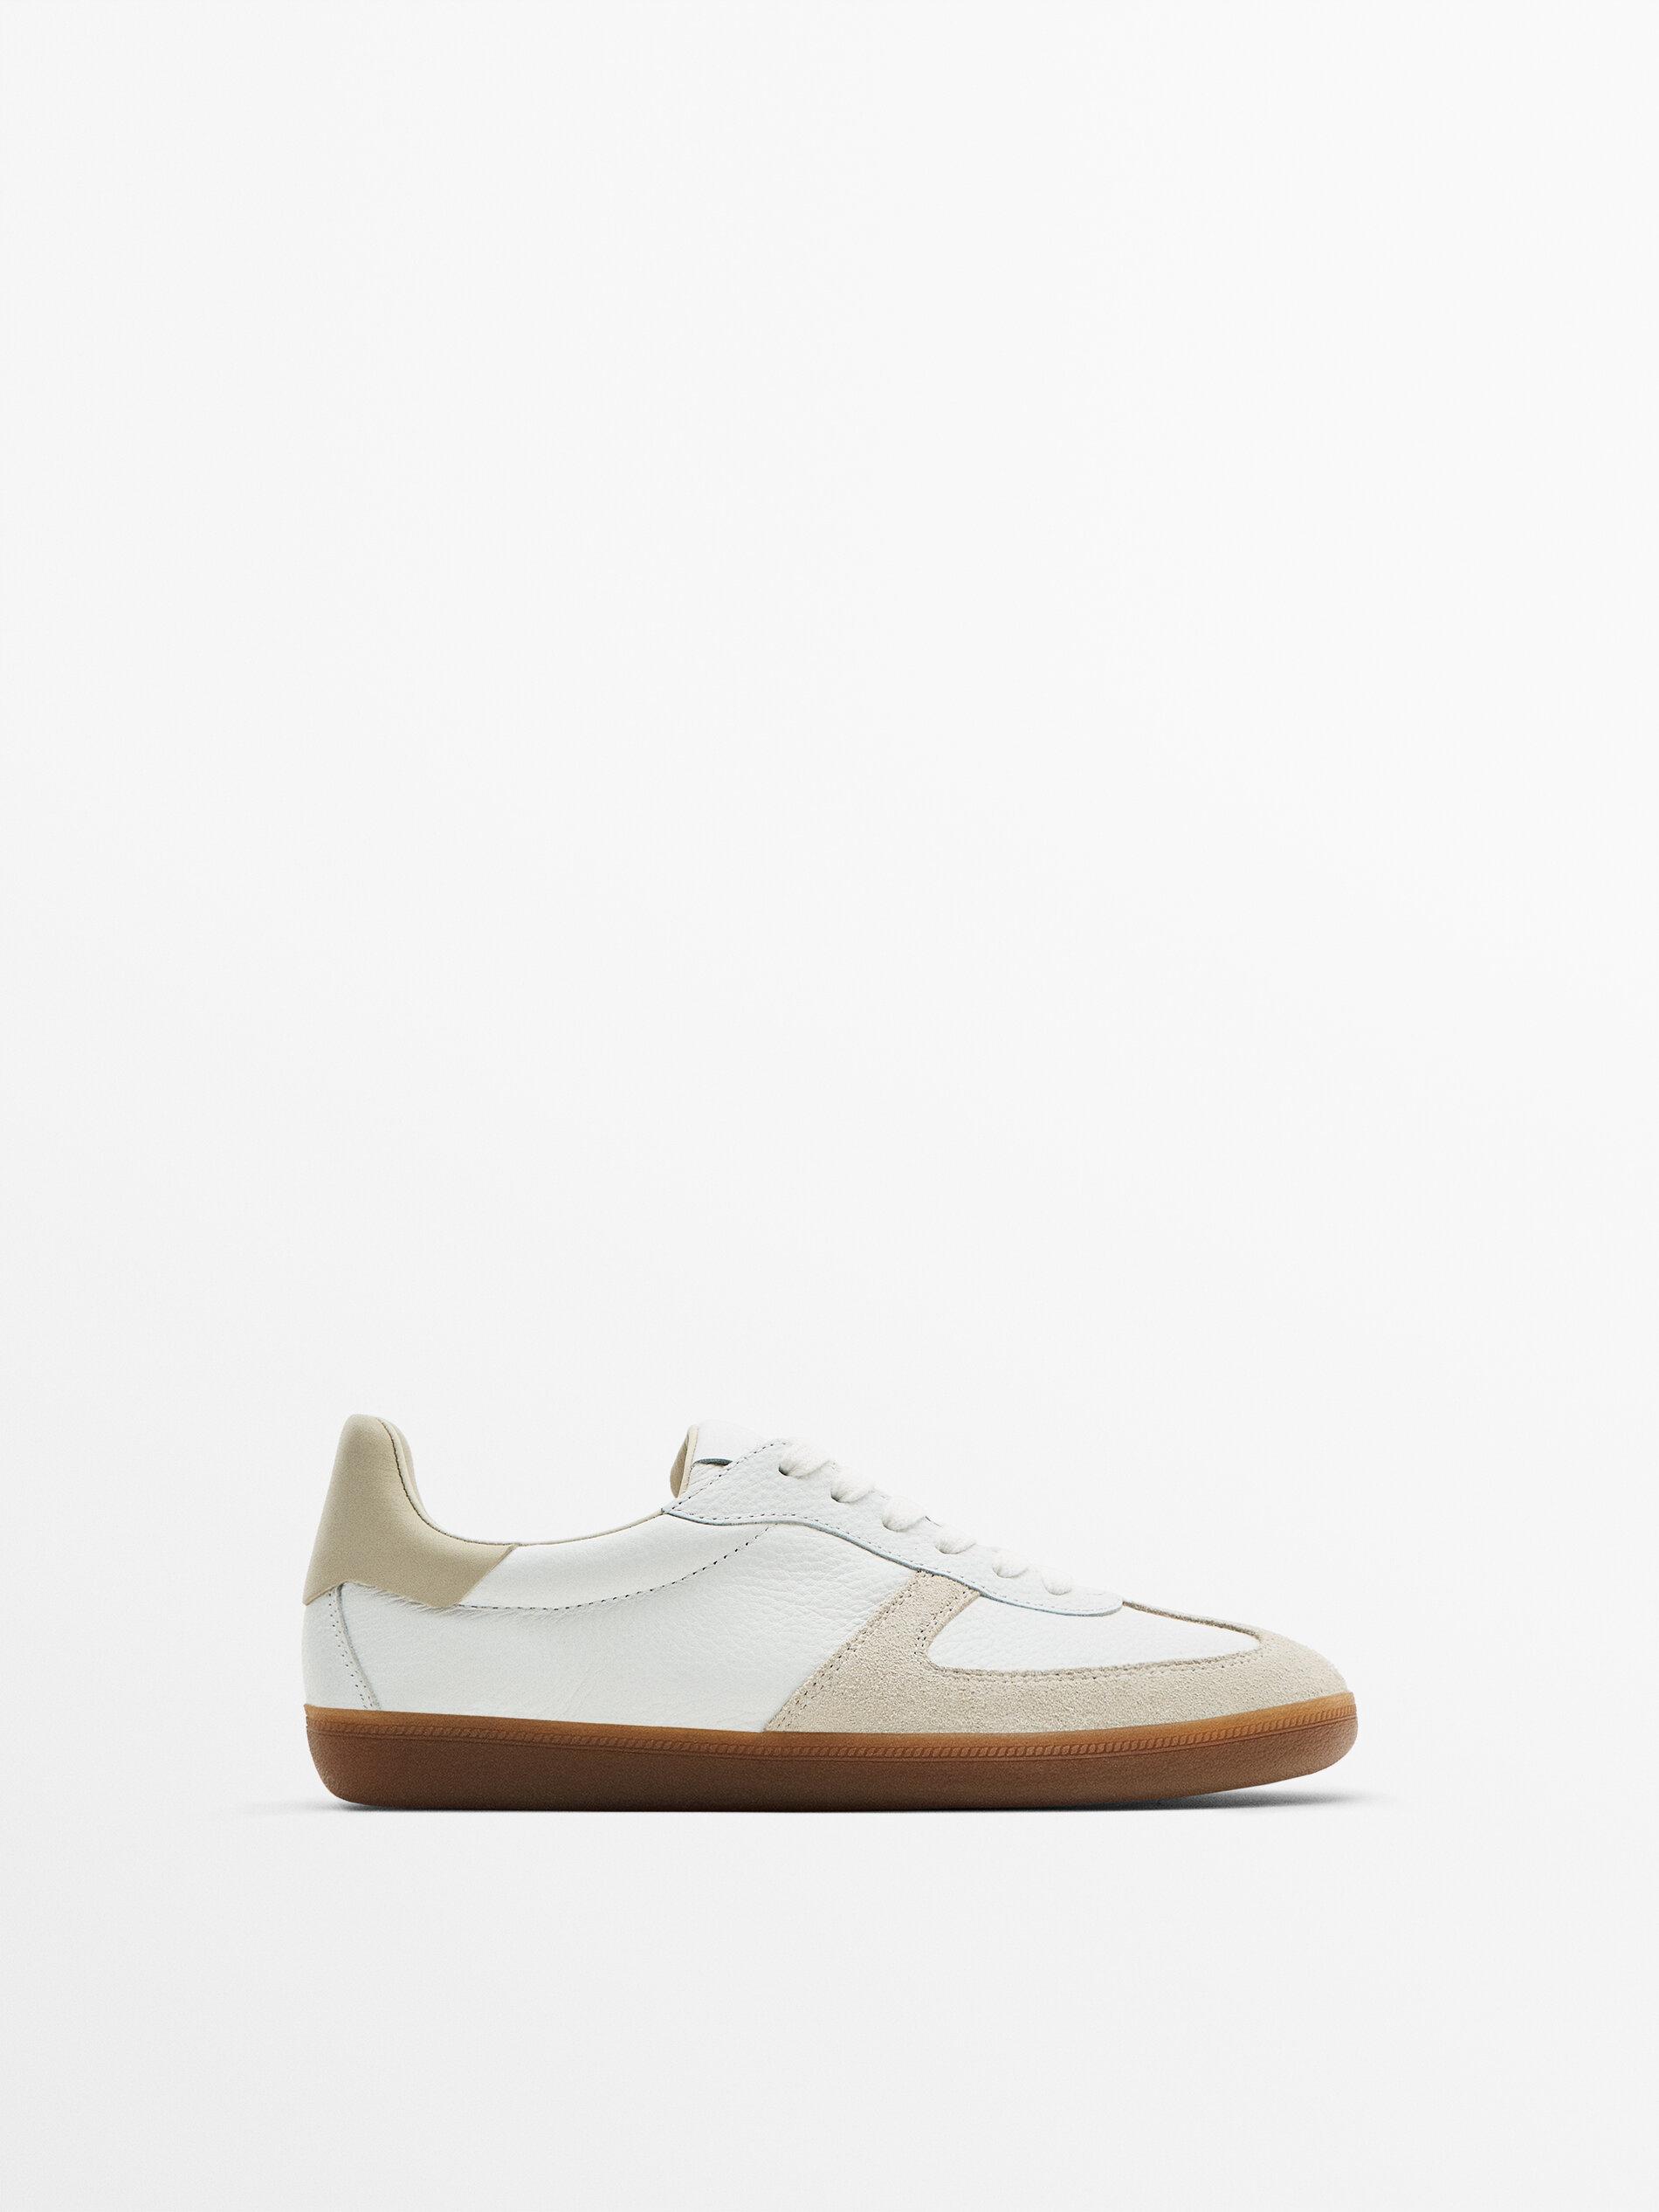 MASSIMO DUTTI Contrast Split Suede Leather Trainers in White | Lyst